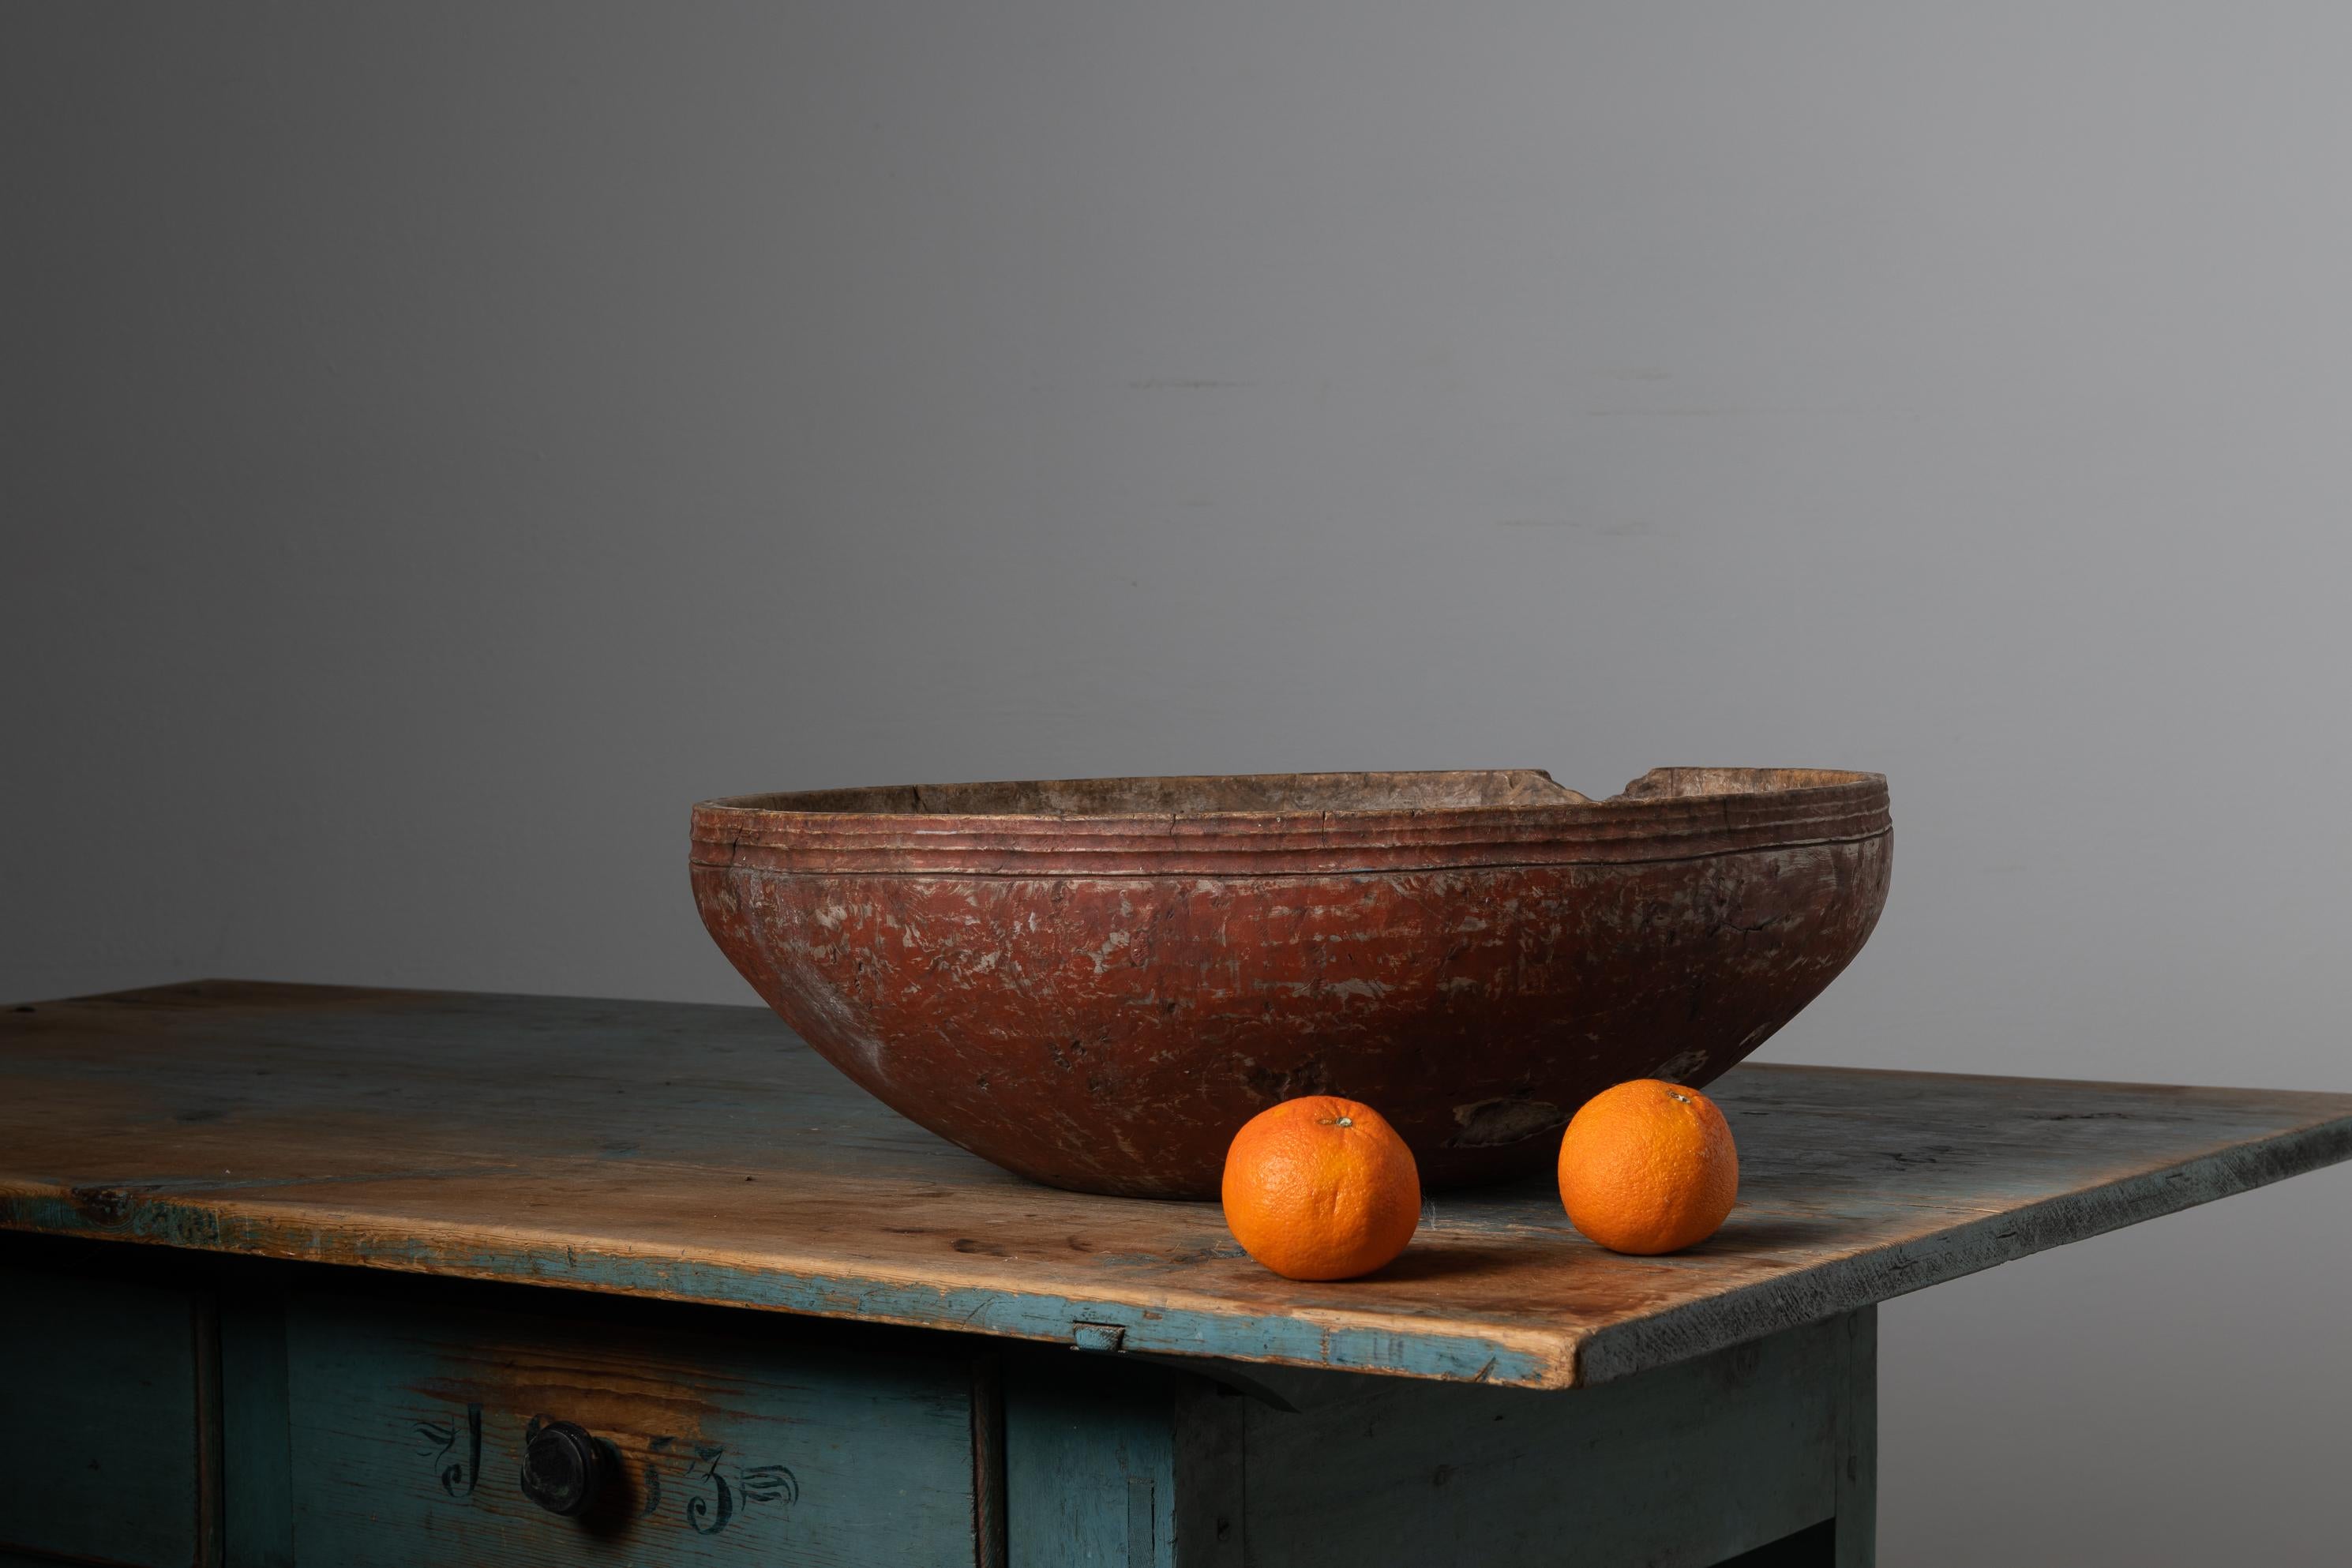 Large Swedish rare root bowl from the late 18th century. The bowl is in untouched original condition with an authentic patina of time after 250 years of use. Dated 1794 underneath and in good condition. It has some minor marks and traces of use and